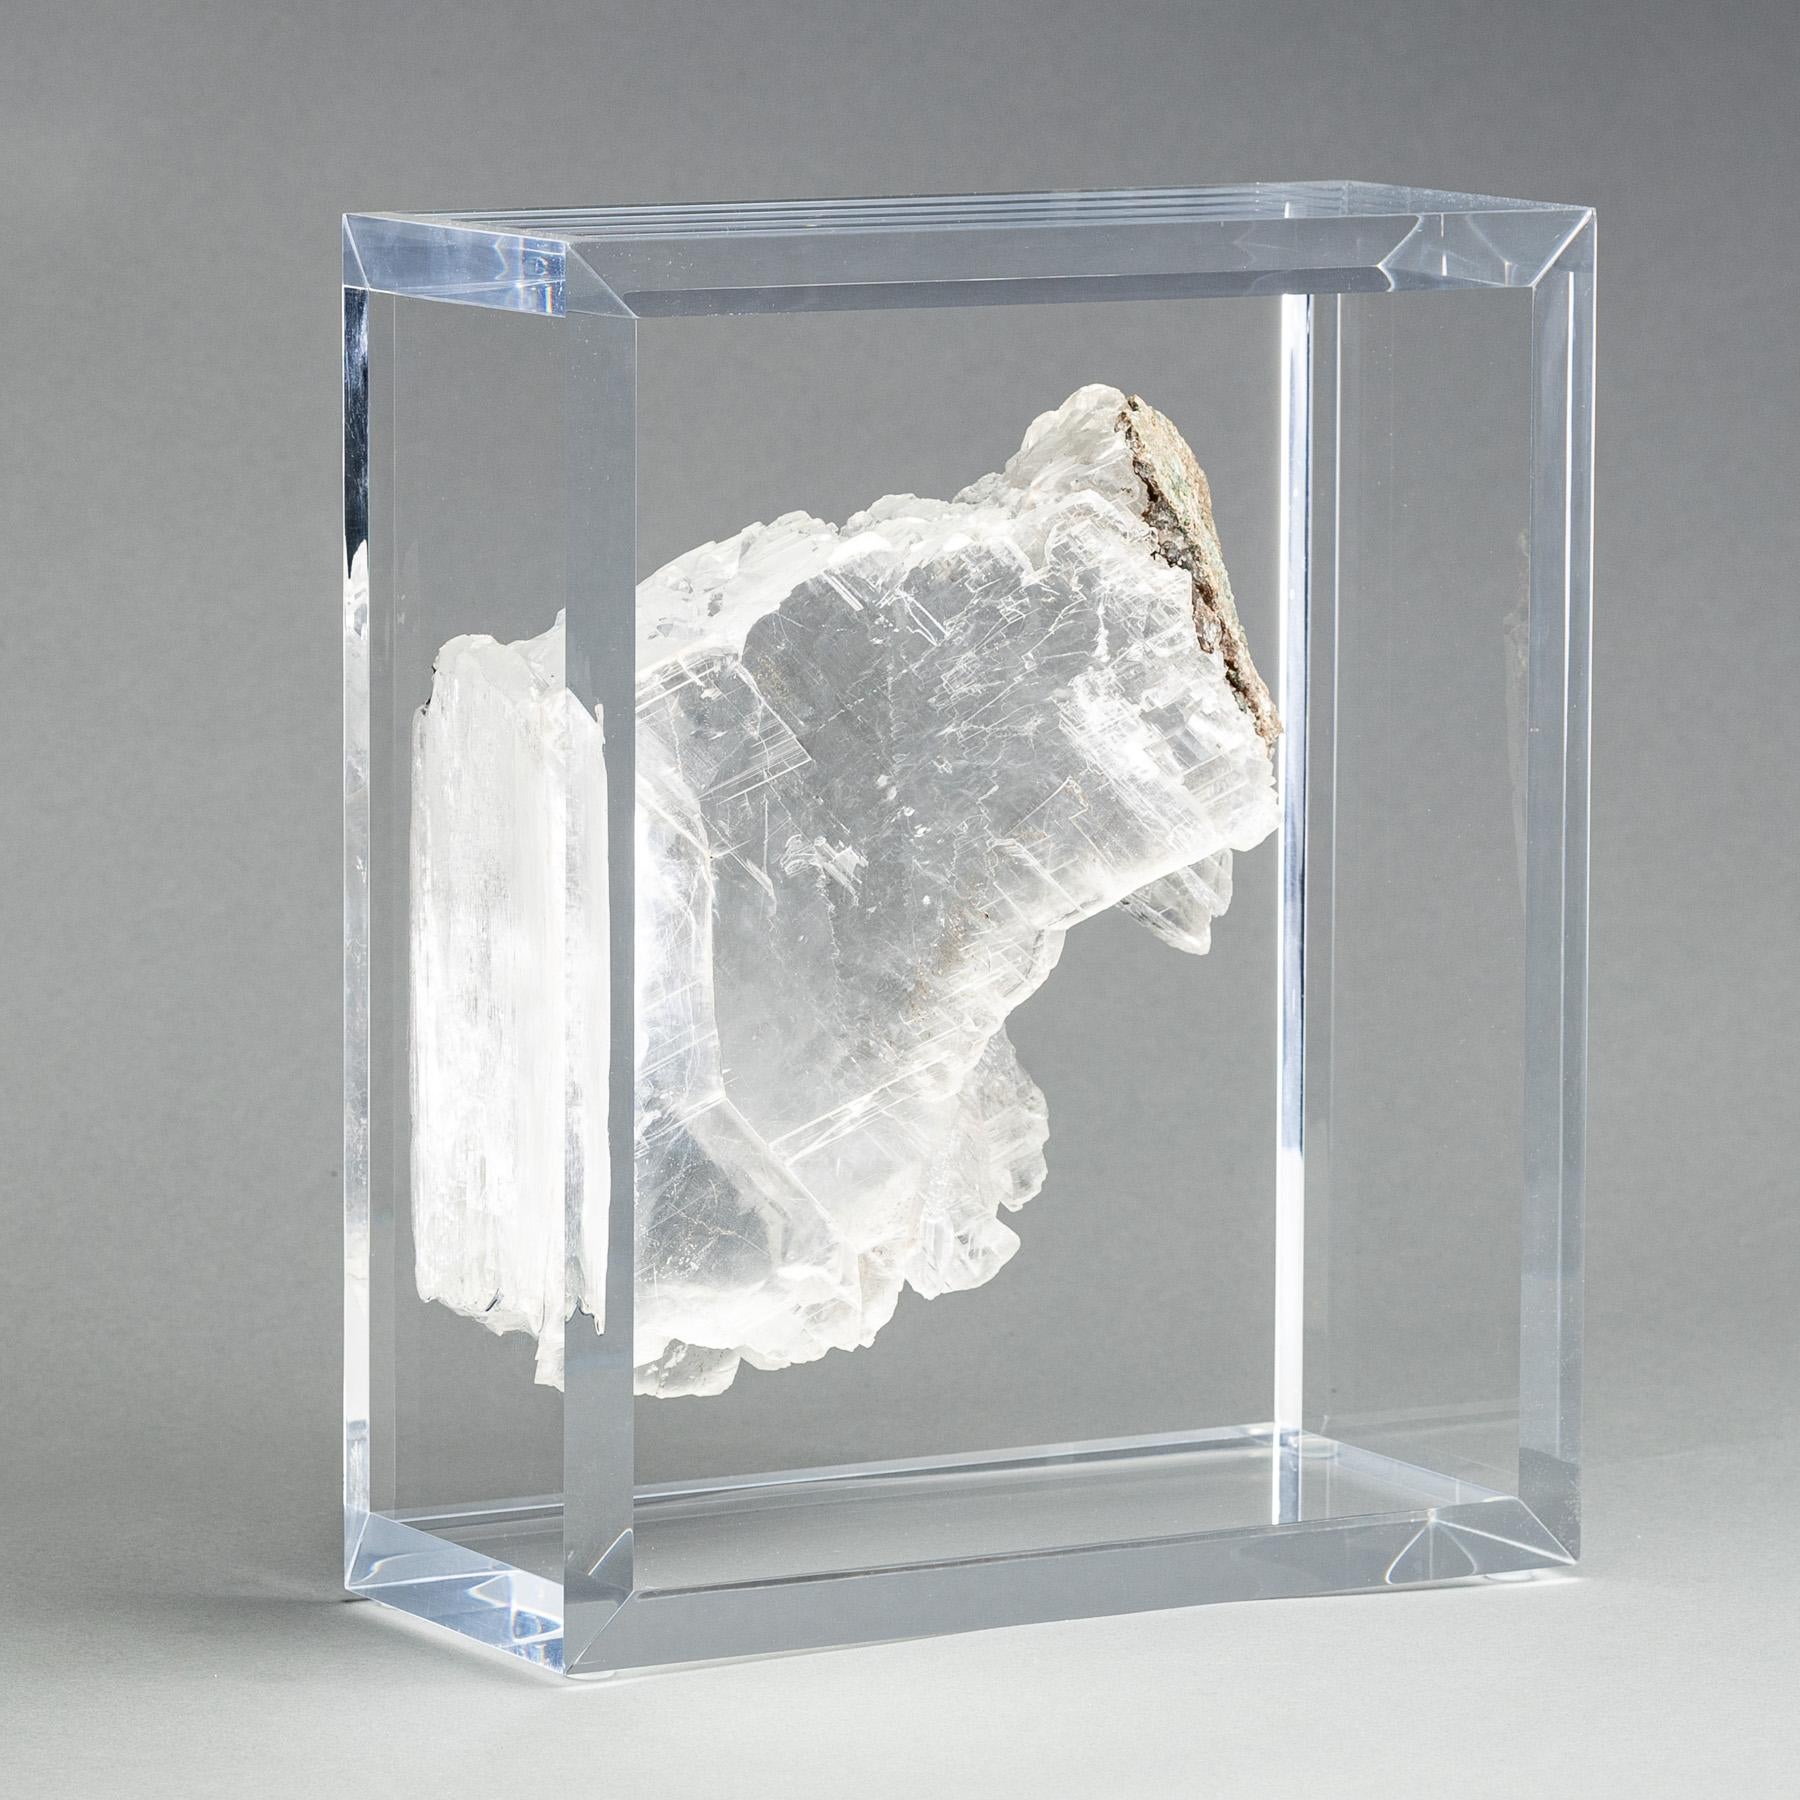 A one of a kind Ice clear selenite specimen from  Rio Grande do Sul, Brazil. With stunning reflective luster and natural lines of growth.  Mounted on  an original design of acrylic box. 


